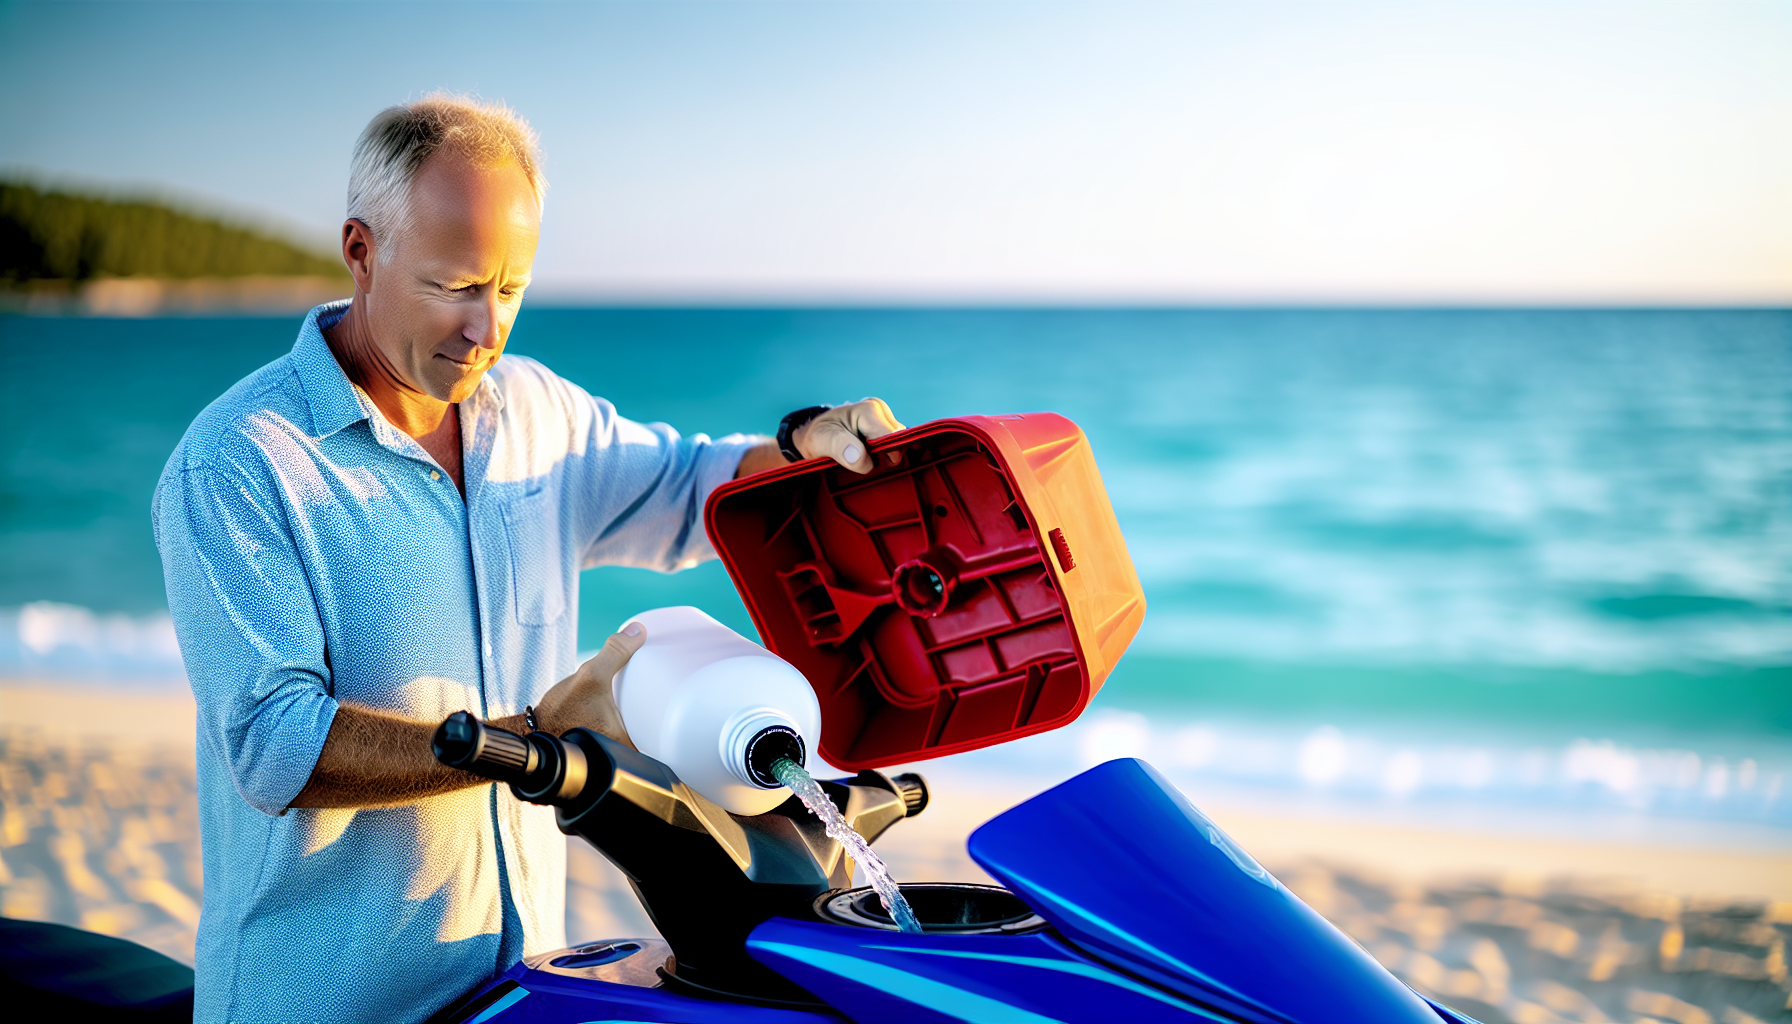 A person pouring fuel stabiliser into a jet ski's fuel tank